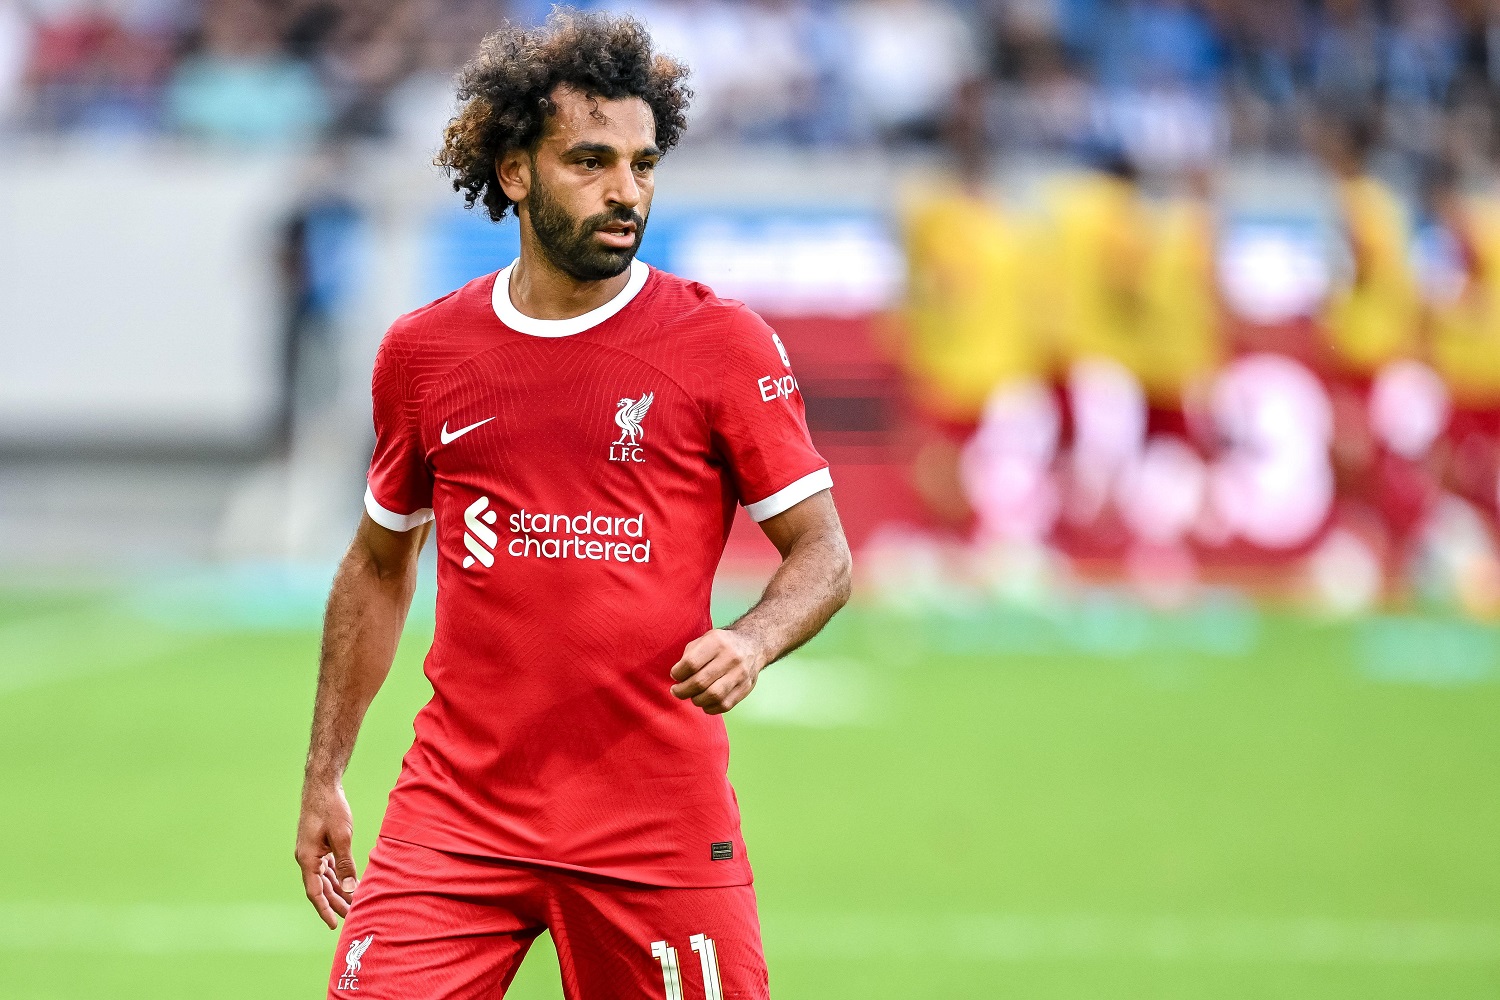 Imaginary details about Mohamed Salah’s income… one million pounds per week without Liverpool’s salary